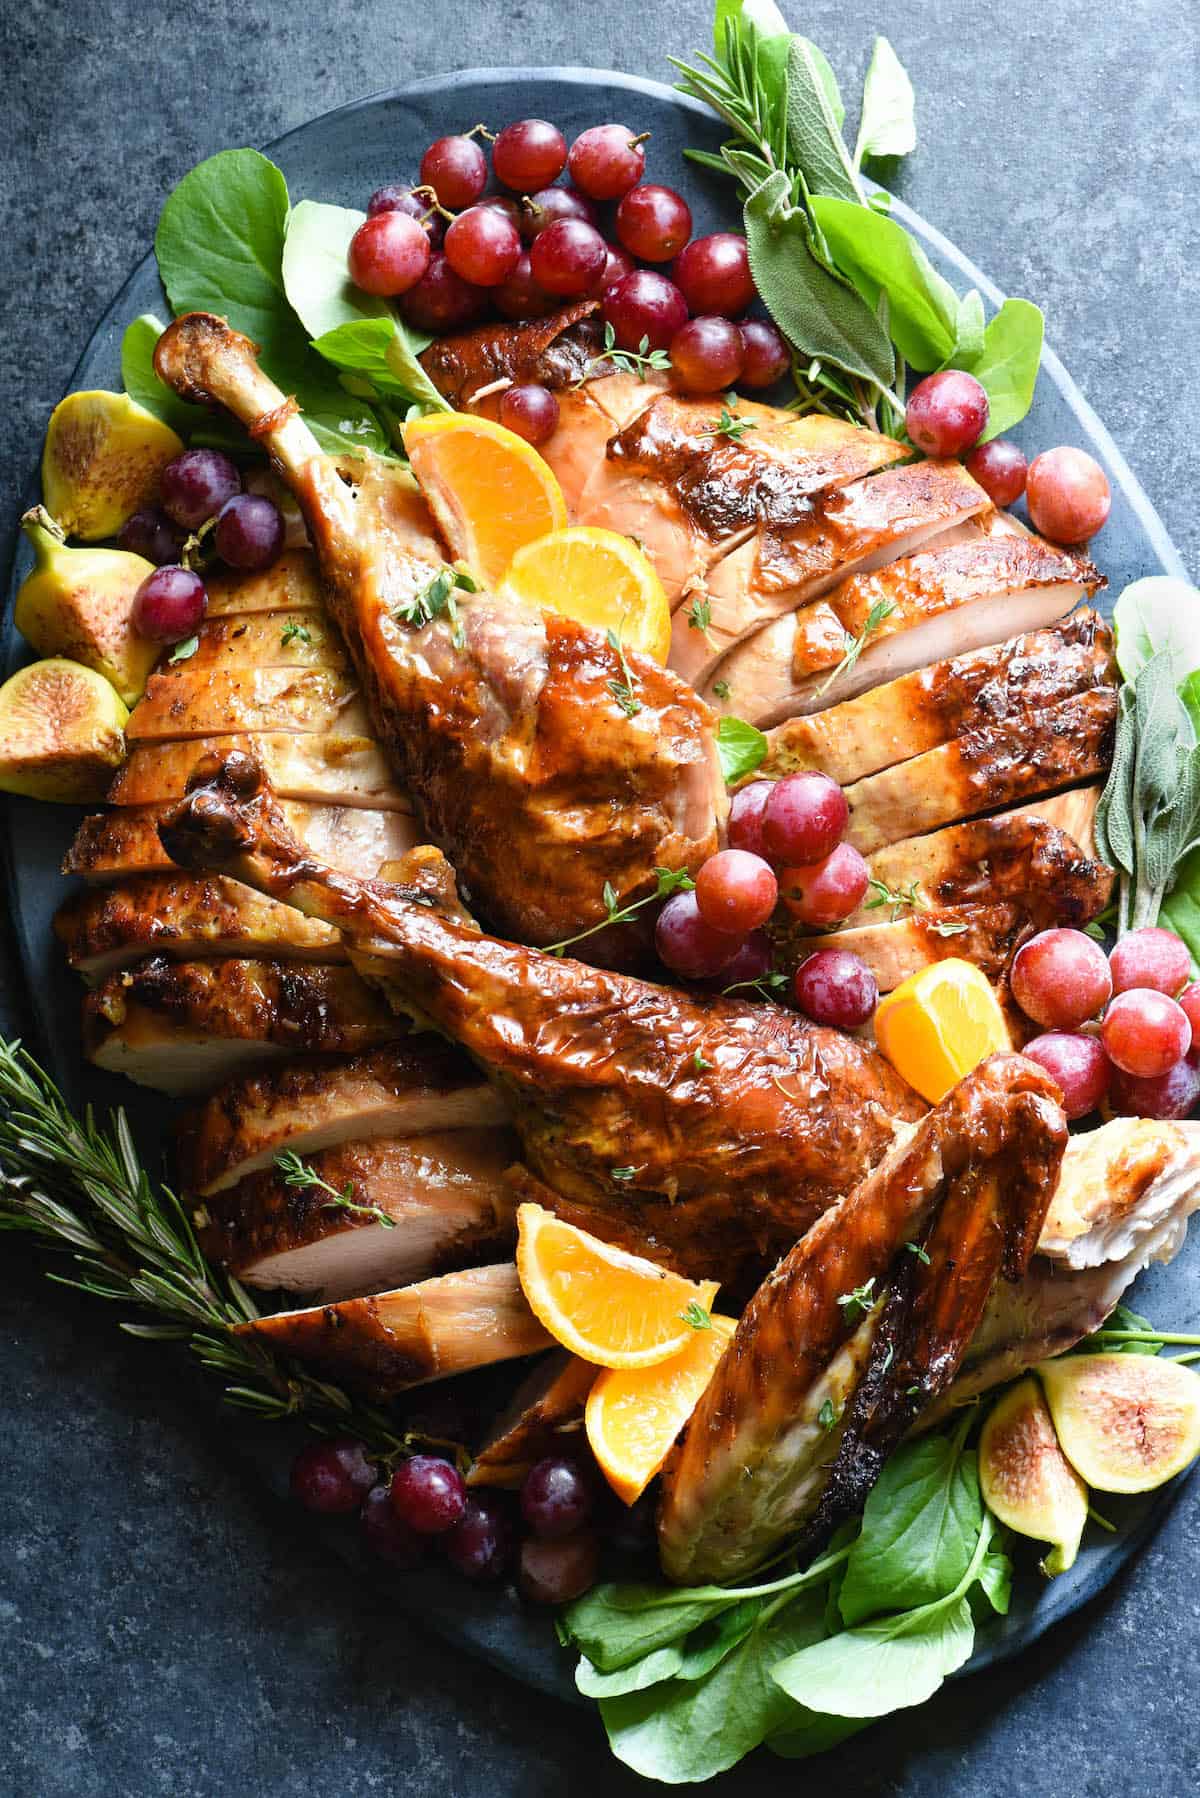 Large platter filled with a roasted turkey with maple bourbon glaze, cut up into pieces. Platter is garnished with fruits and herbs.